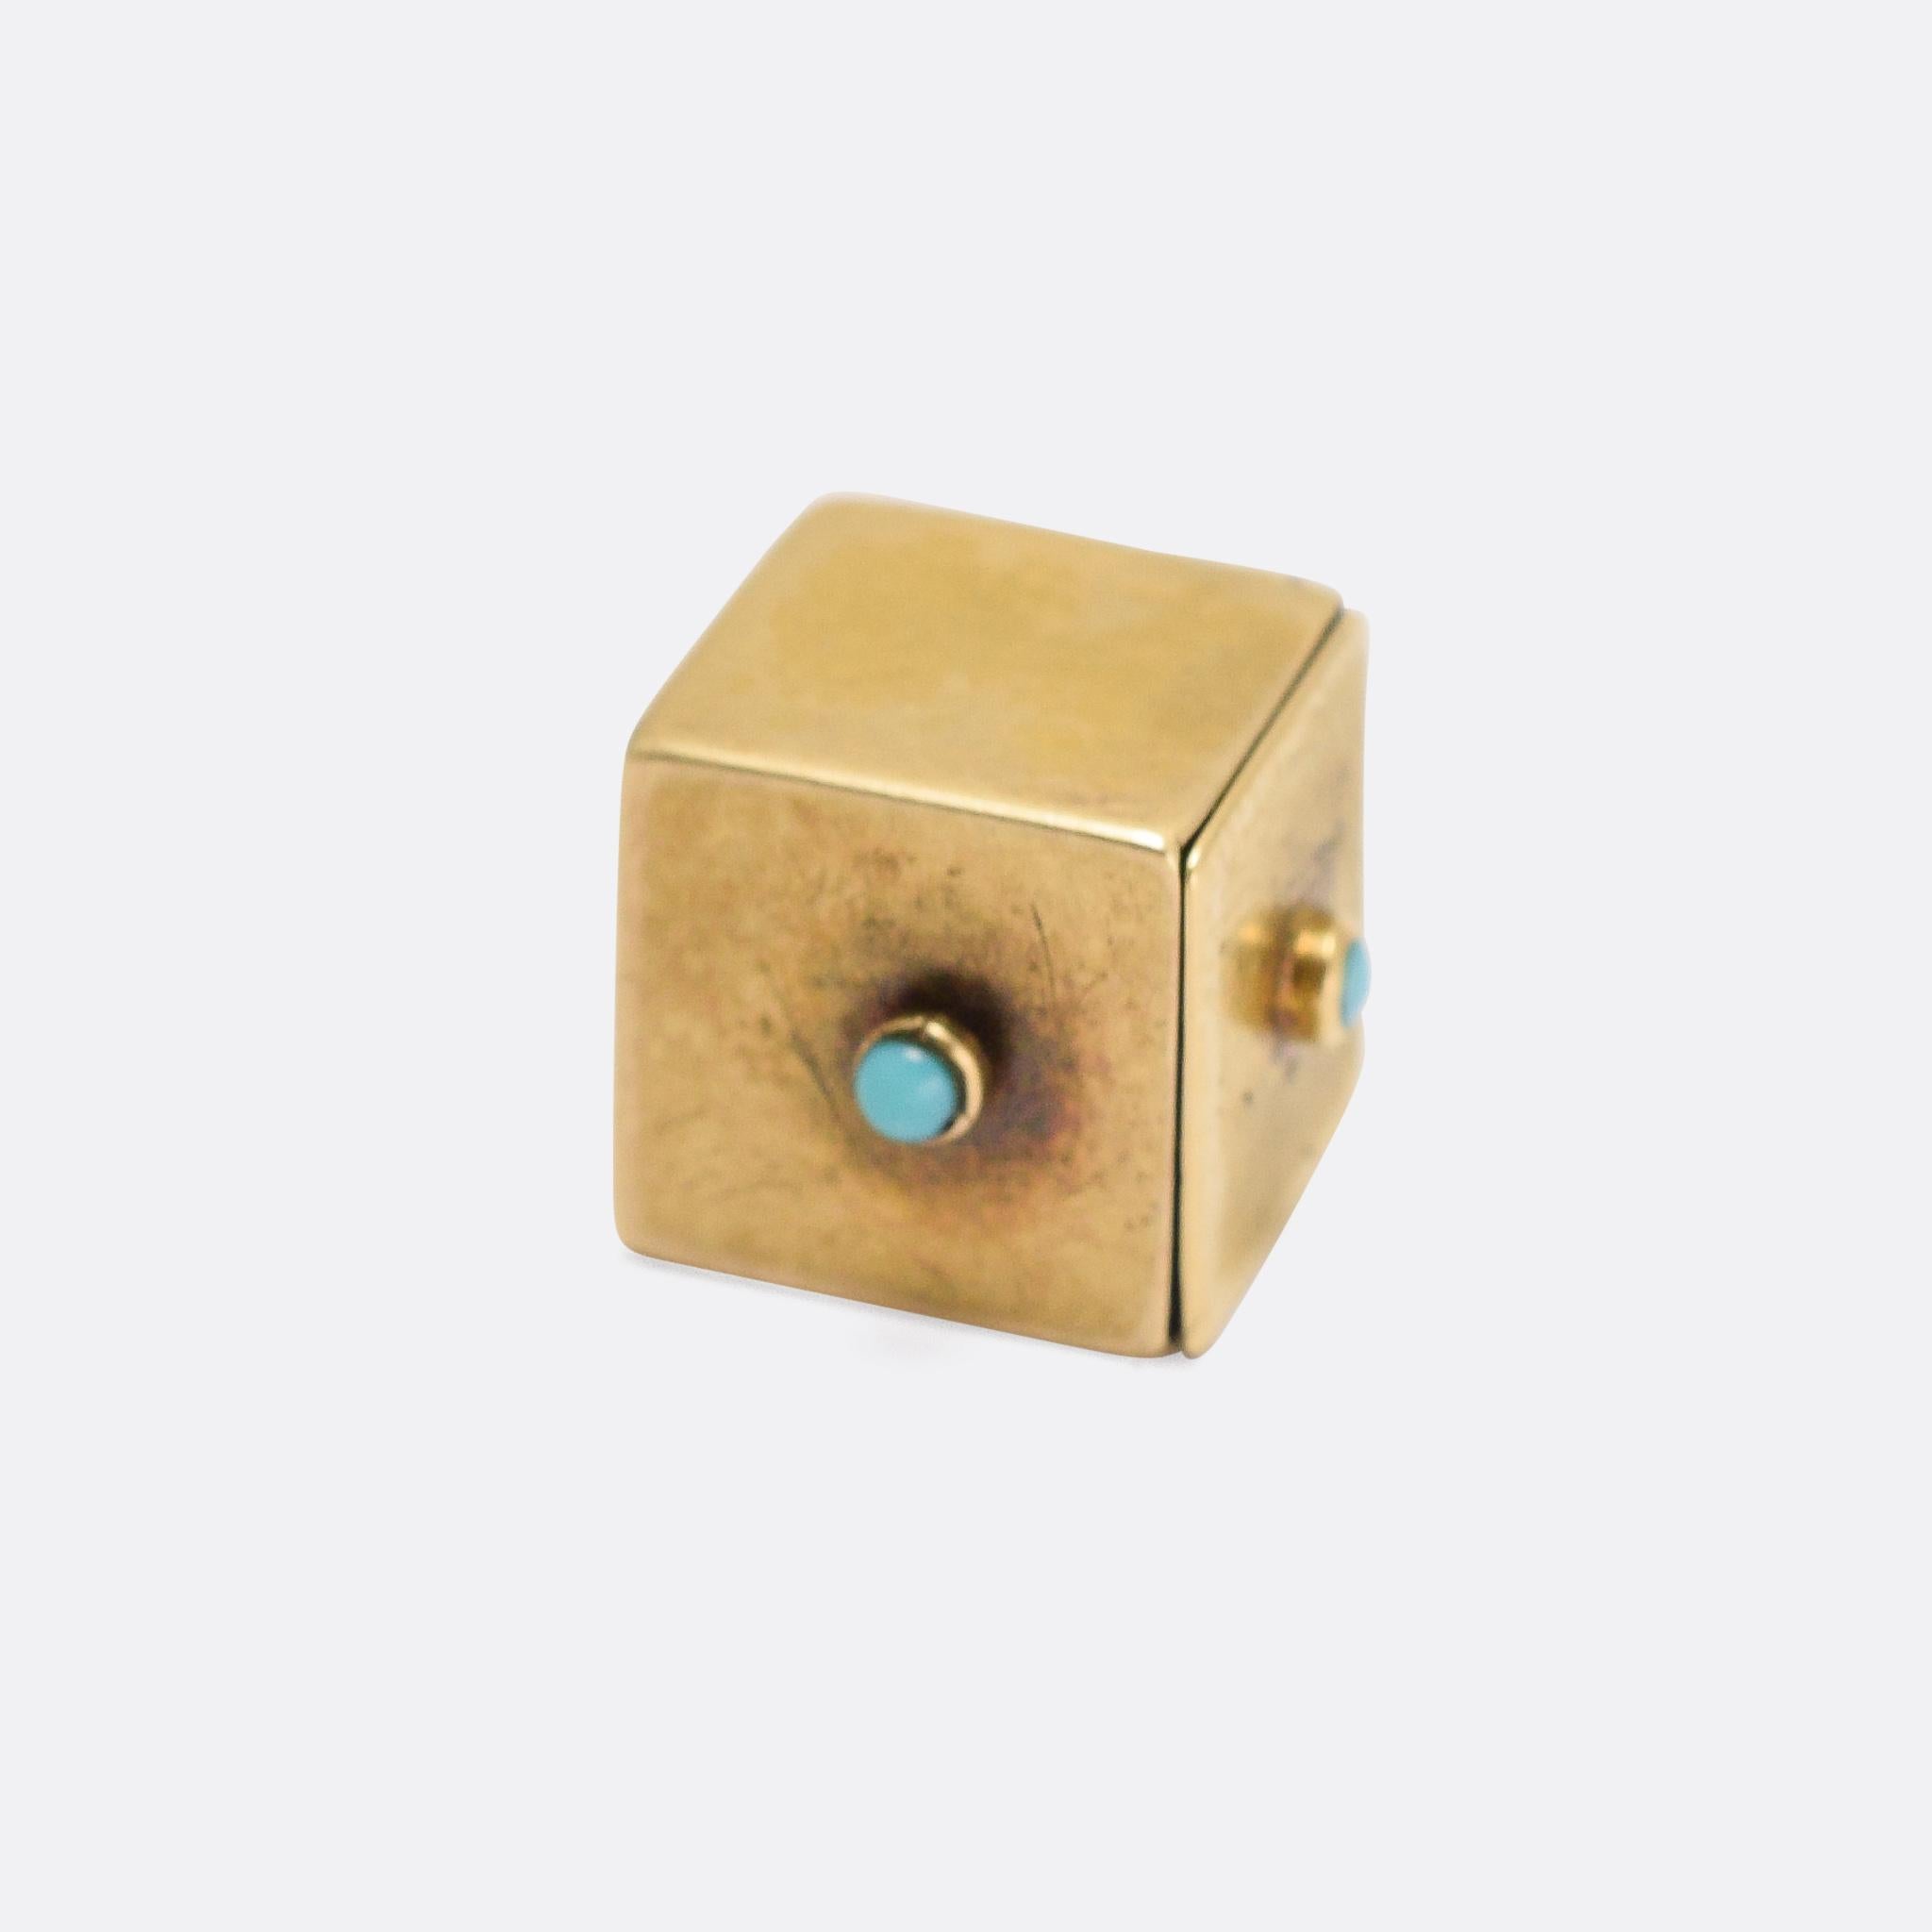 A cool antique charm... with a very sensible moral message. It's a cube (signifying a die), set with turquoise cabochons, and when pressed a certain way a ruby-eyed devil pops up. A simple reminder of the evils of gambling. Modelled in 15k yellow